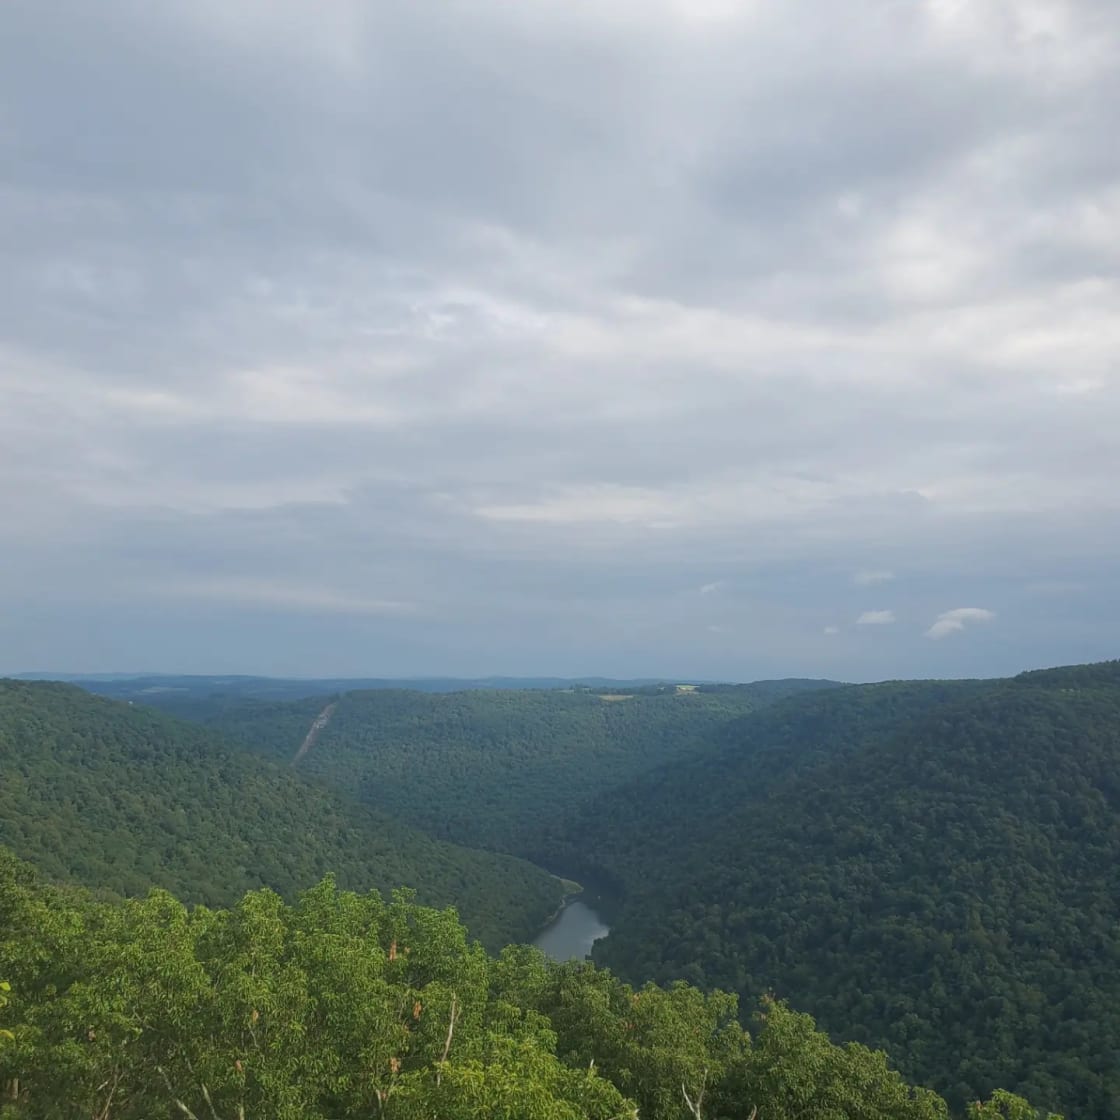 Cooper's Rock State Park is 5 minutes up the road from the community towards Morgantown. Trails and views abound. Also a great place to refill on water and dump waste at the camping area.